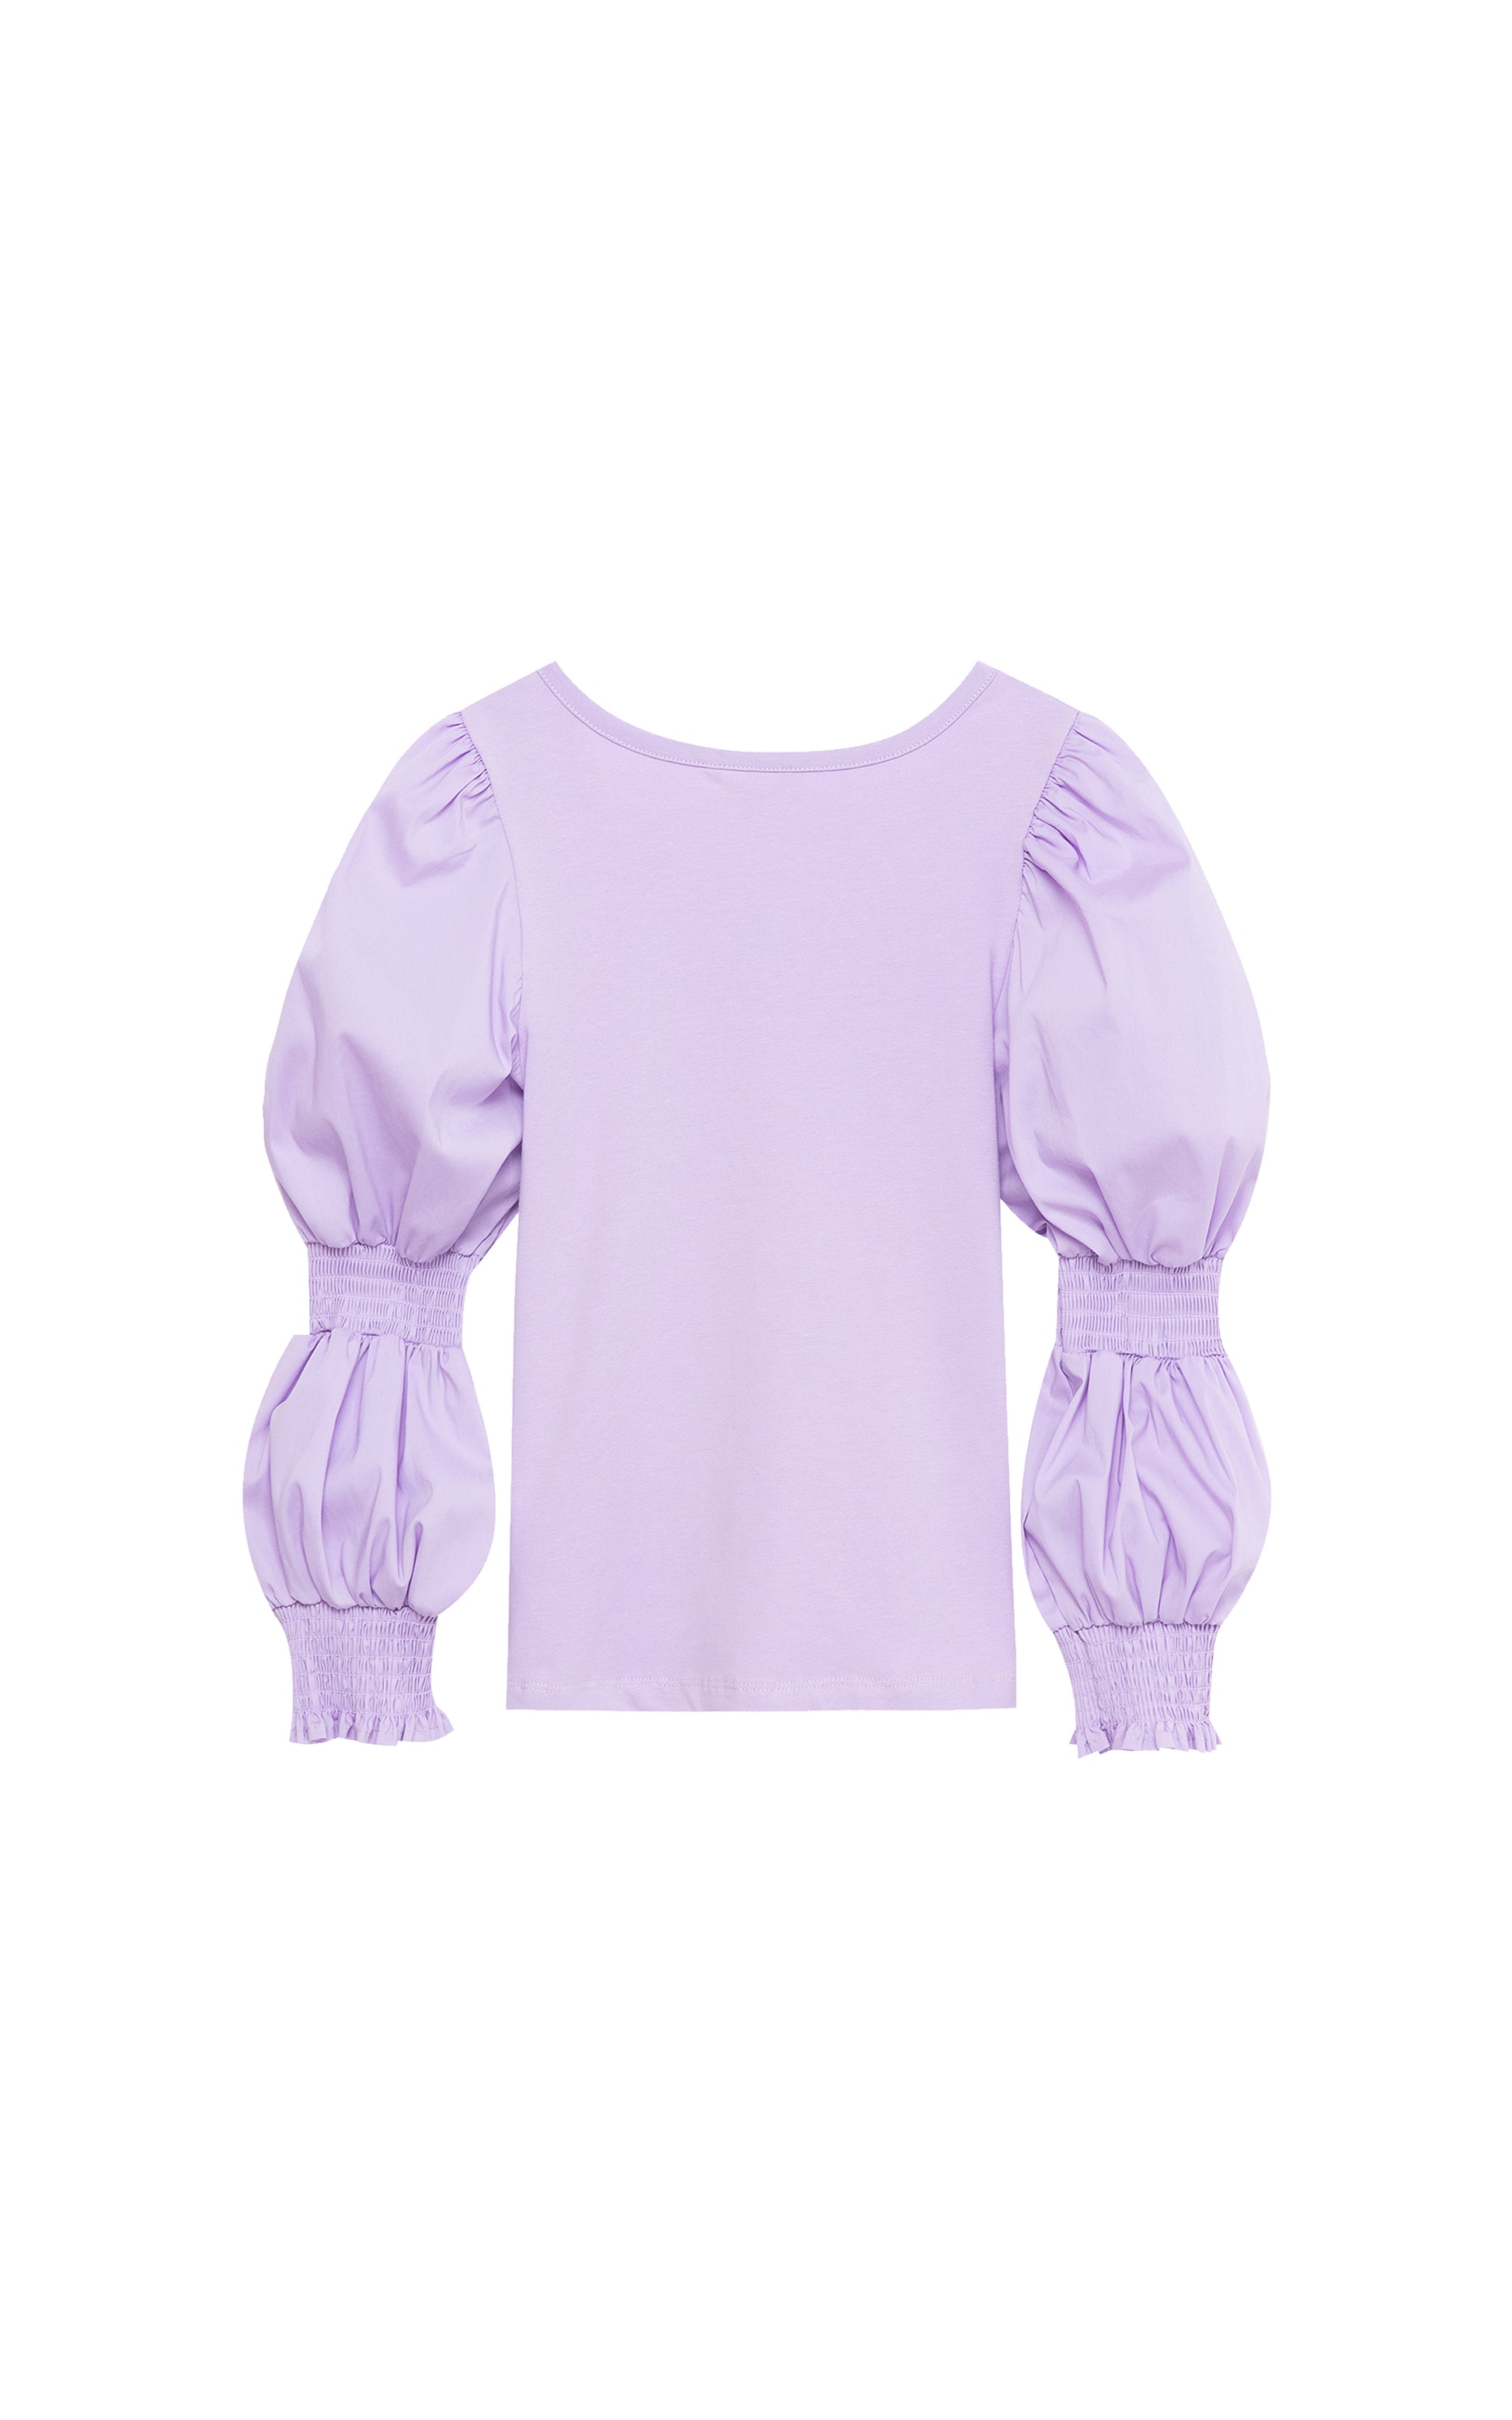 BACK OF LIGHT PURPLE LONG-SLEEVE TOP WITH SMOCKING ALONG THE SLEEVES